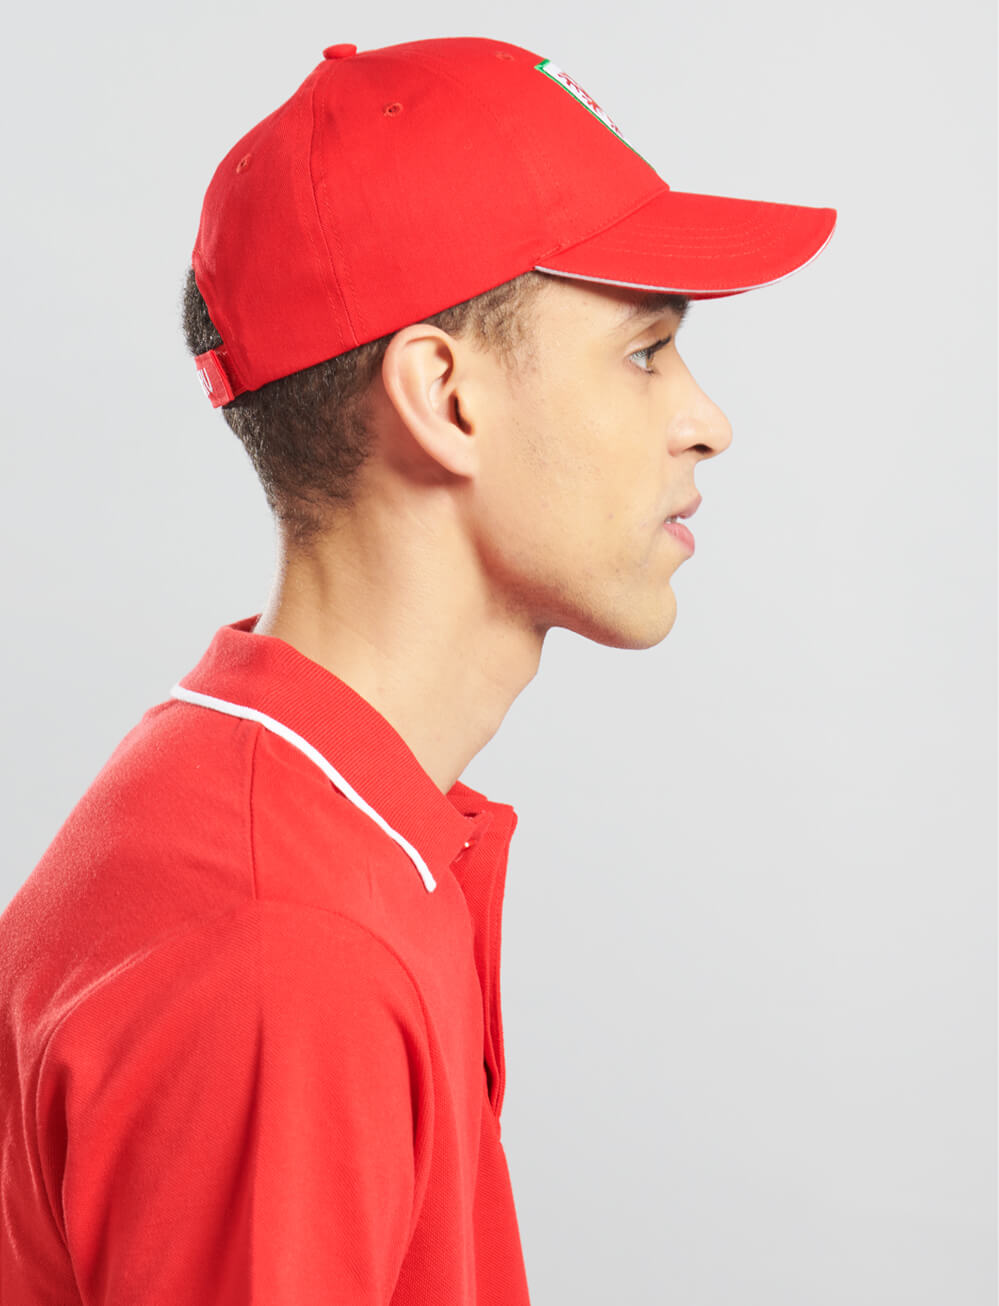 Official Team Wales Cap - Red - The World Football Store